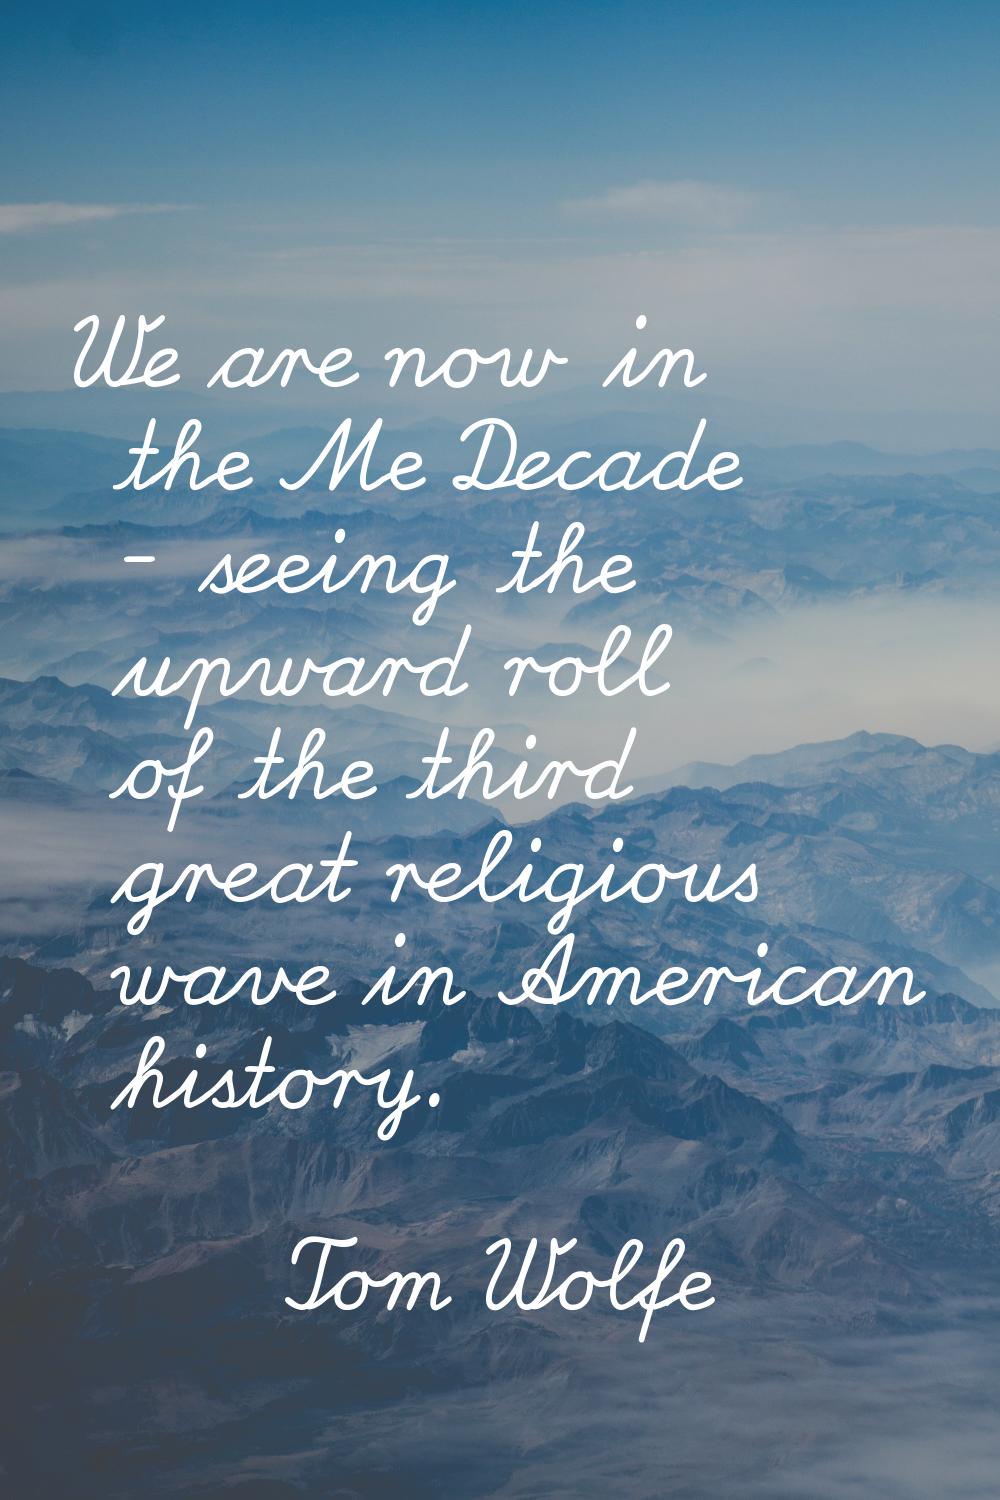 We are now in the Me Decade - seeing the upward roll of the third great religious wave in American 